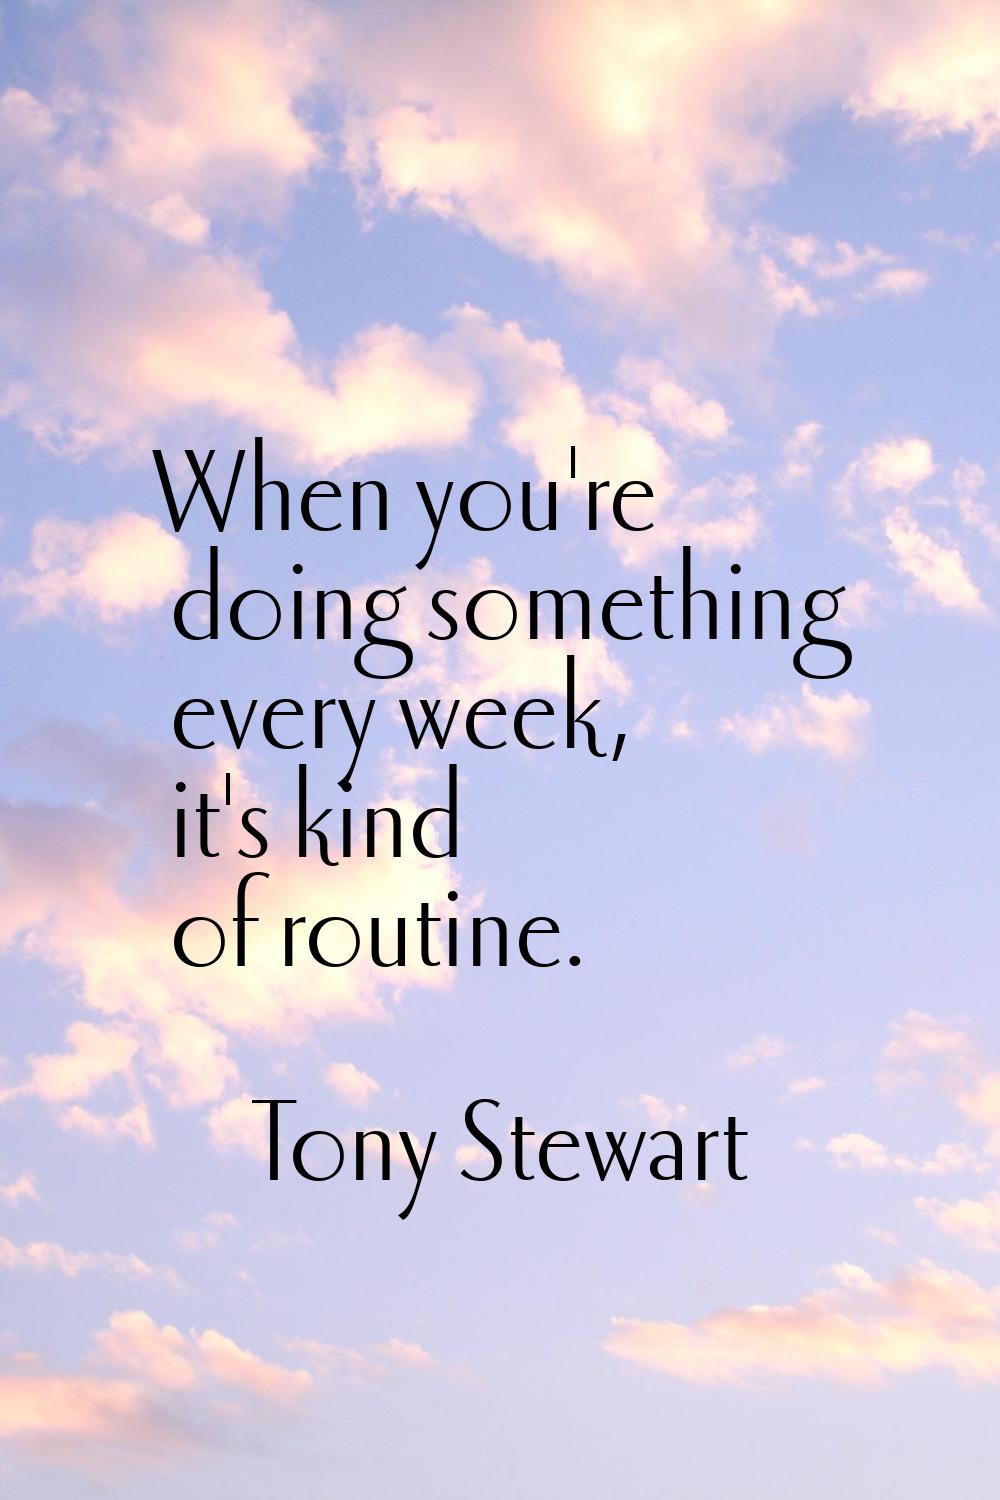 When you're doing something every week, it's kind of routine.